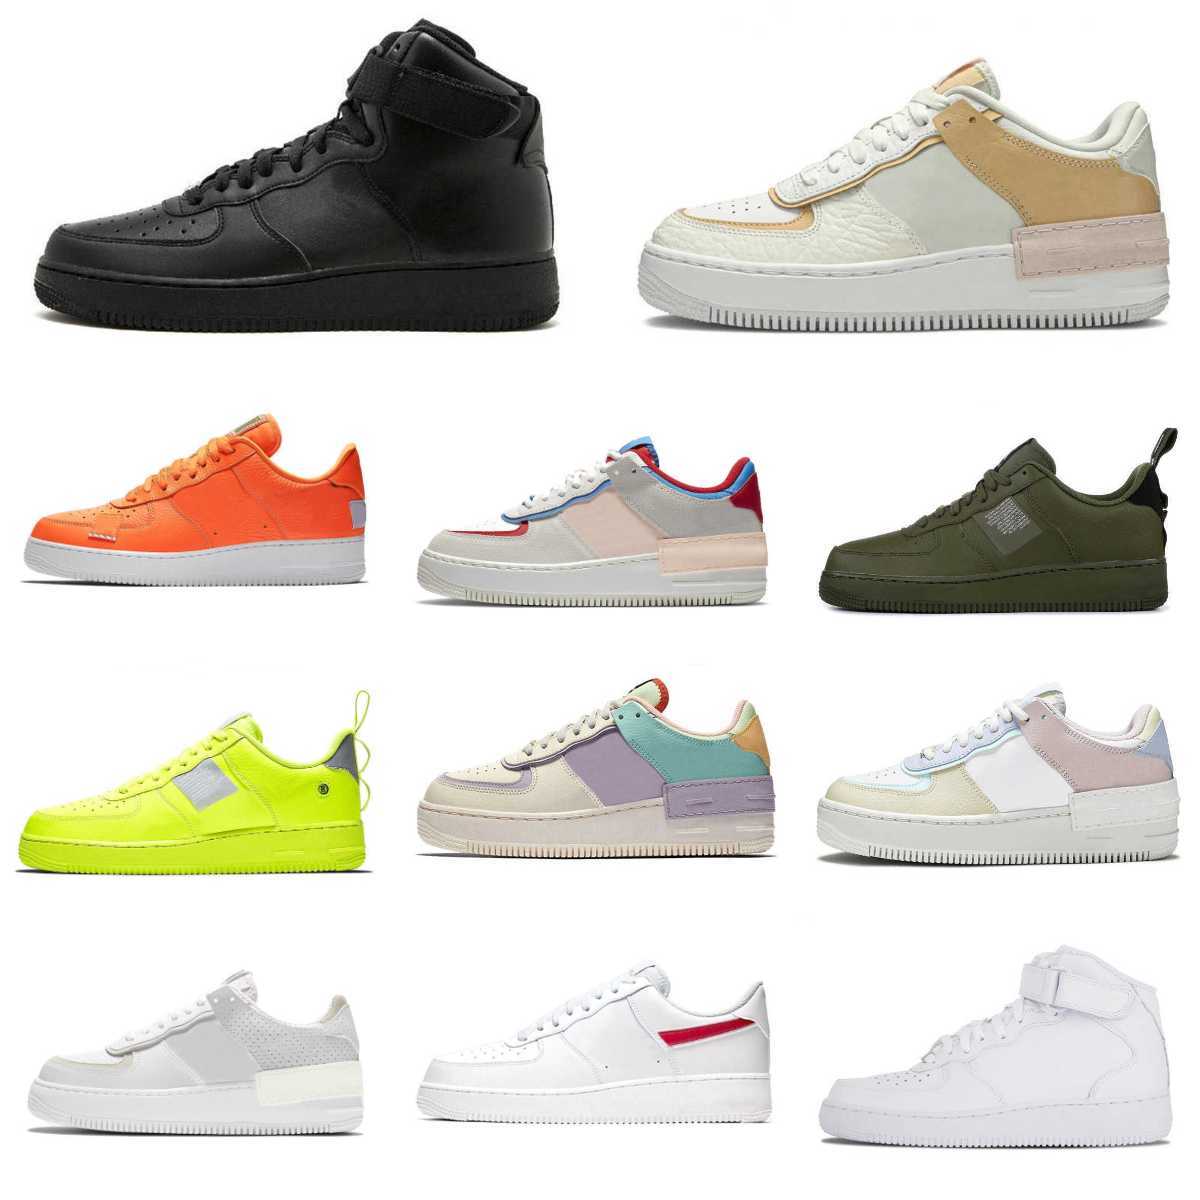 

High Quality Mens Sports Shoes OG Classic Triple White Low Shadow Utility Black Wheat Pistachio Frost Pale Ivory Pastel Beige Men Women Designer Trainers Sneakers, Please contact us